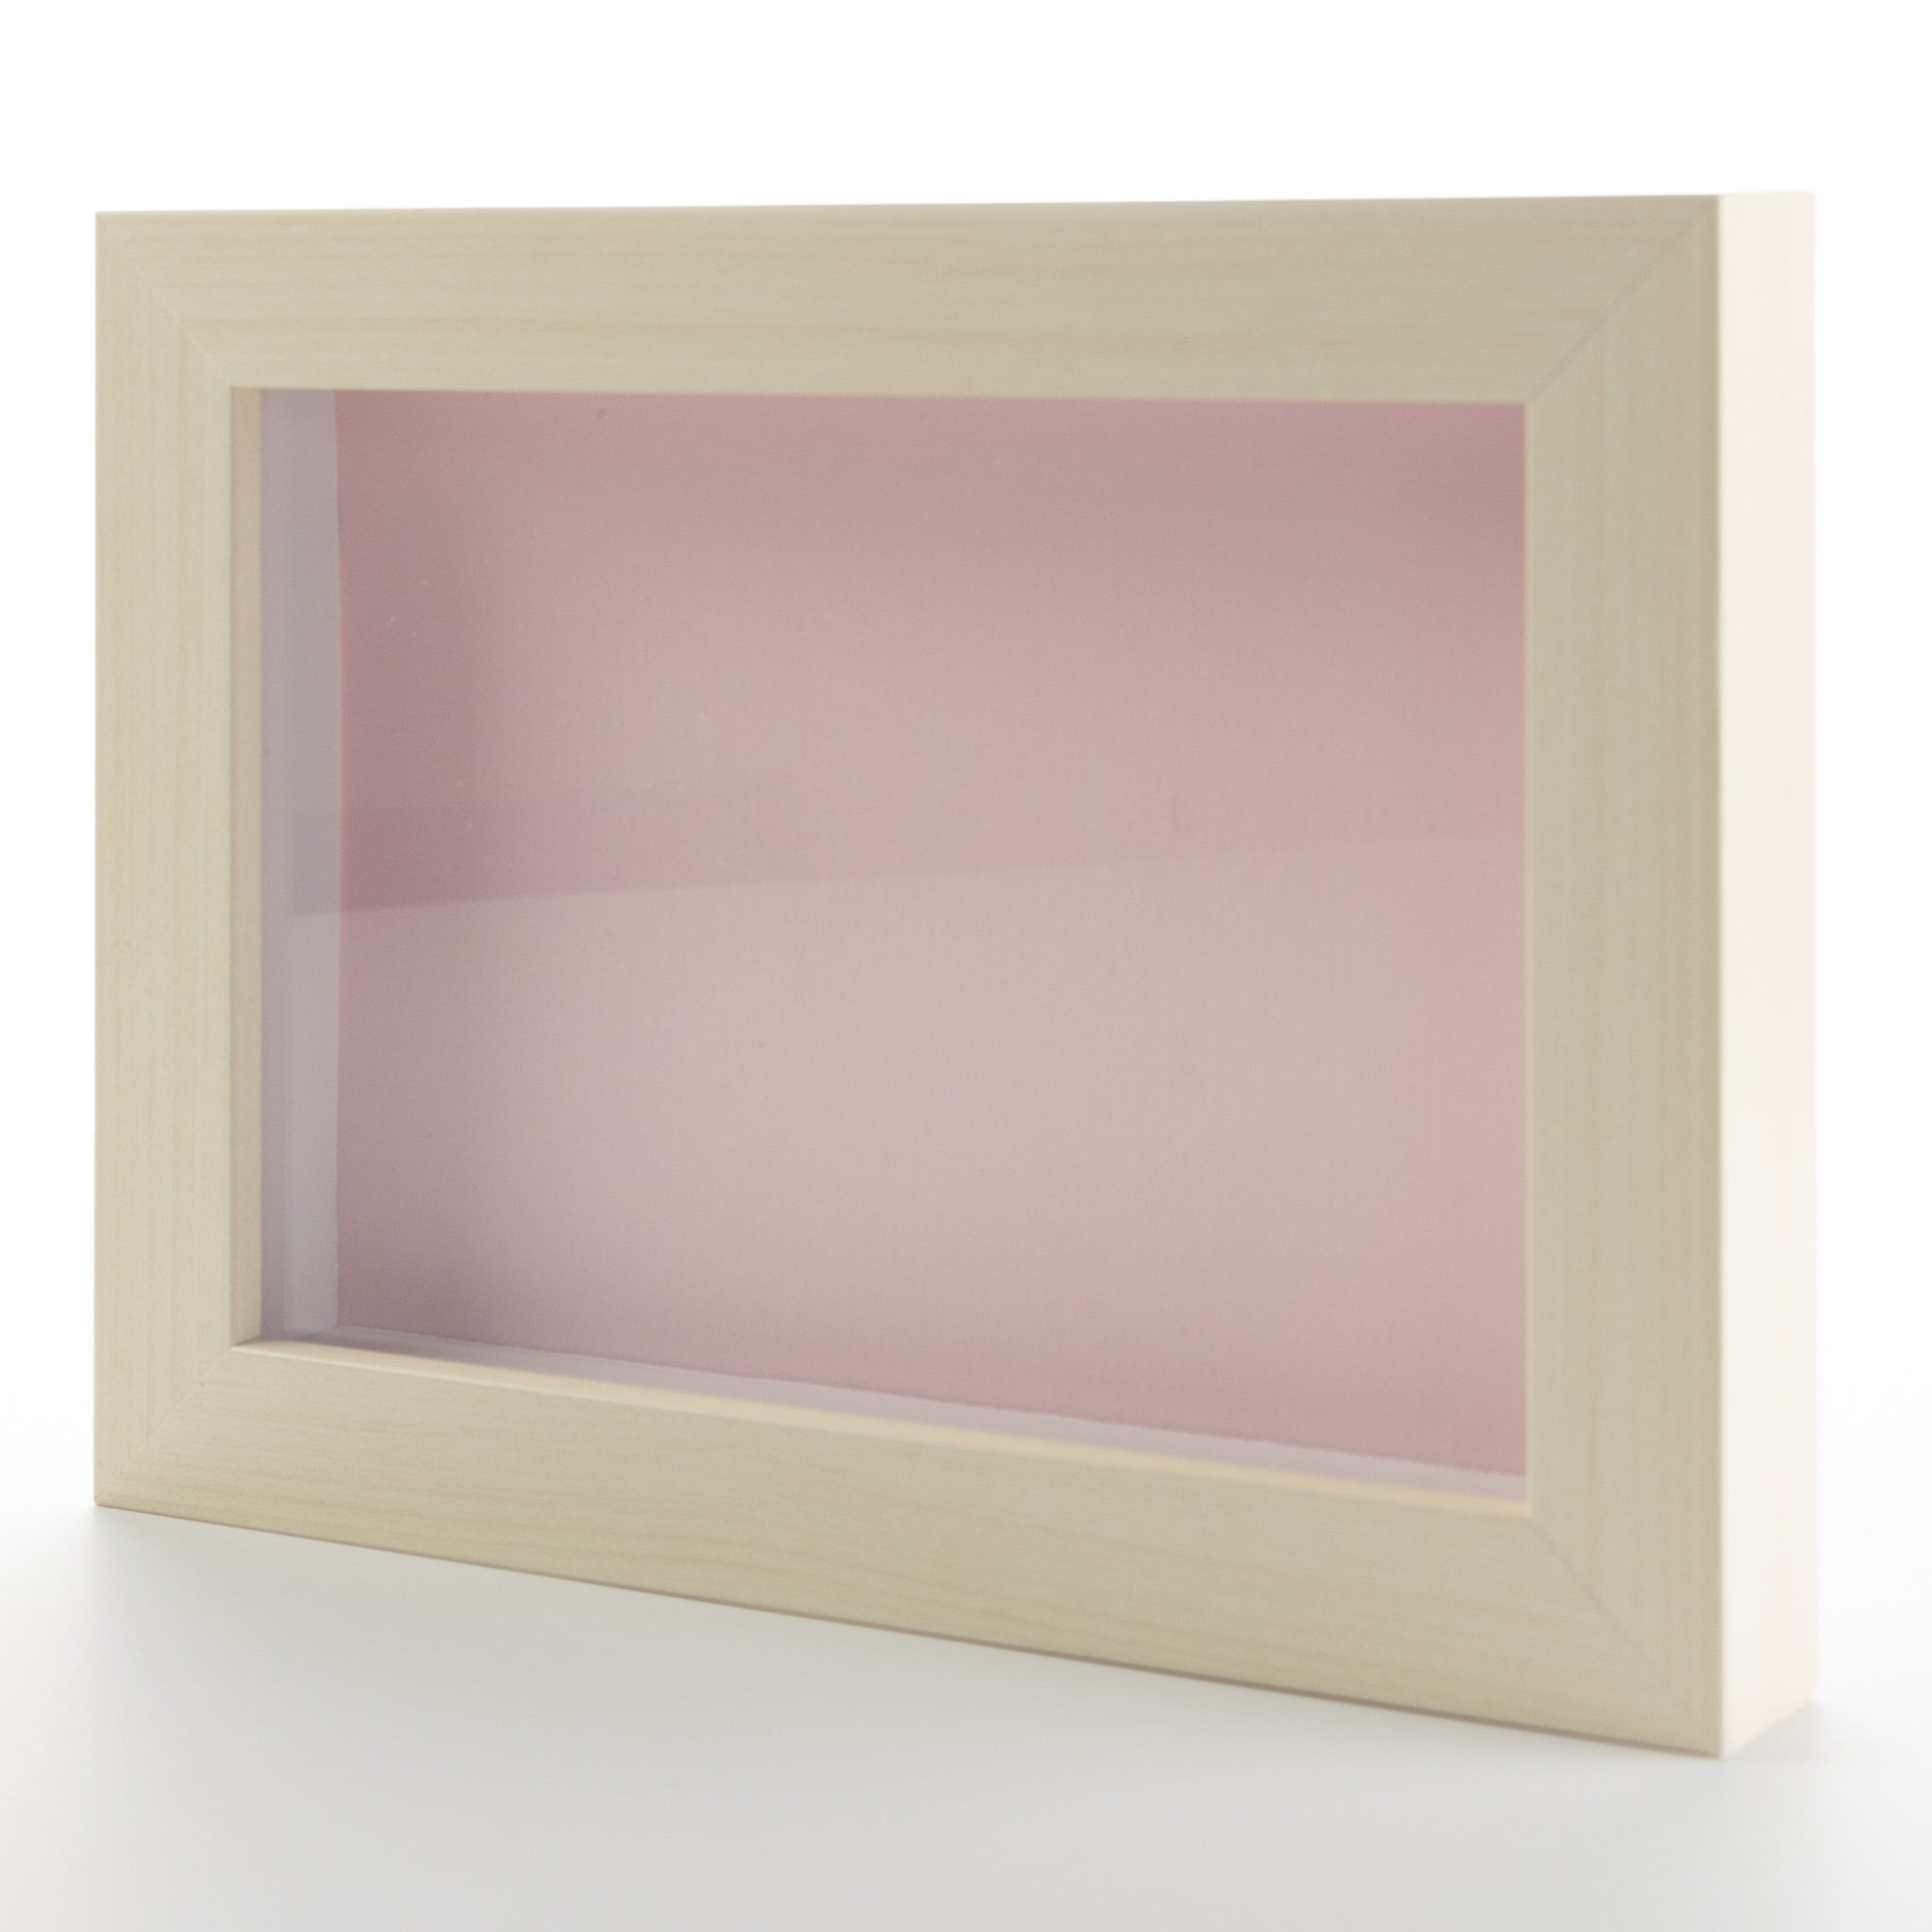 8x8 Shadow Box Frame Light Real Wood with a Pink Acid-Free Backing | 3/4  of Usuable Depth | UV